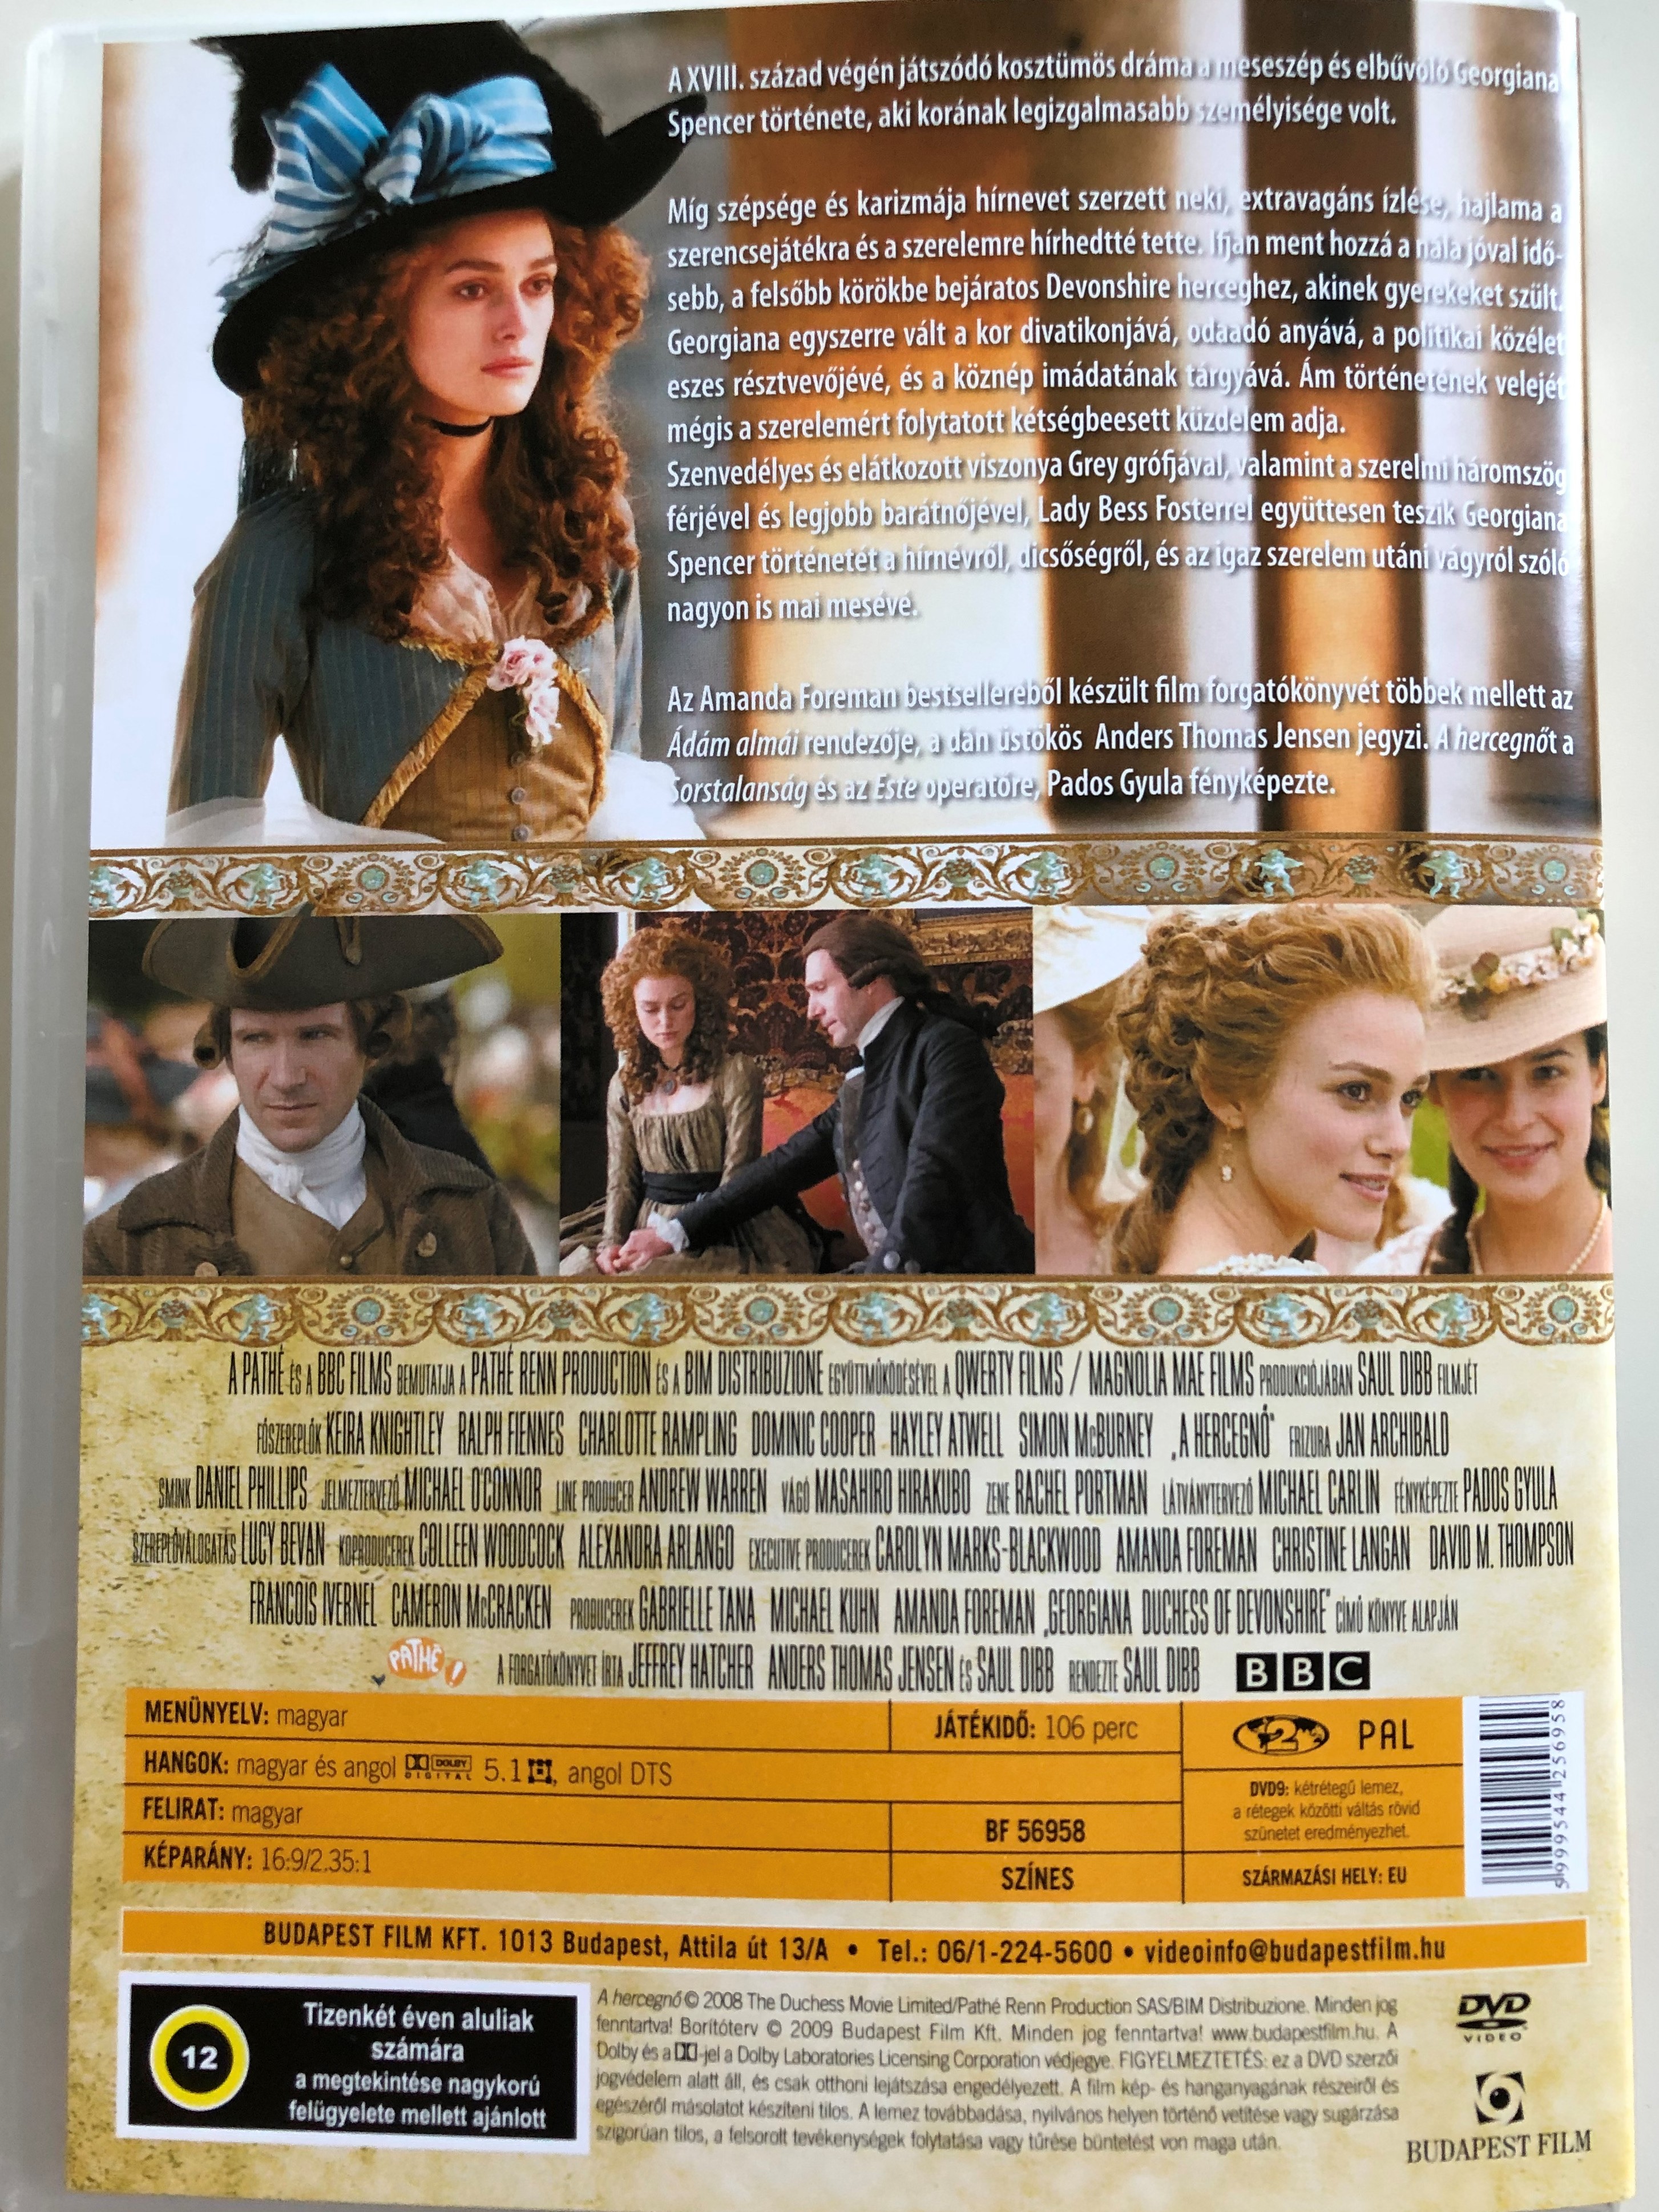 the-duchess-dvd-2008-a-hercegn-directed-by-saul-dibb-starring-keira-knightley-ralph-fiennes-charlotte-rampling-dominic-cooper-2-.jpg